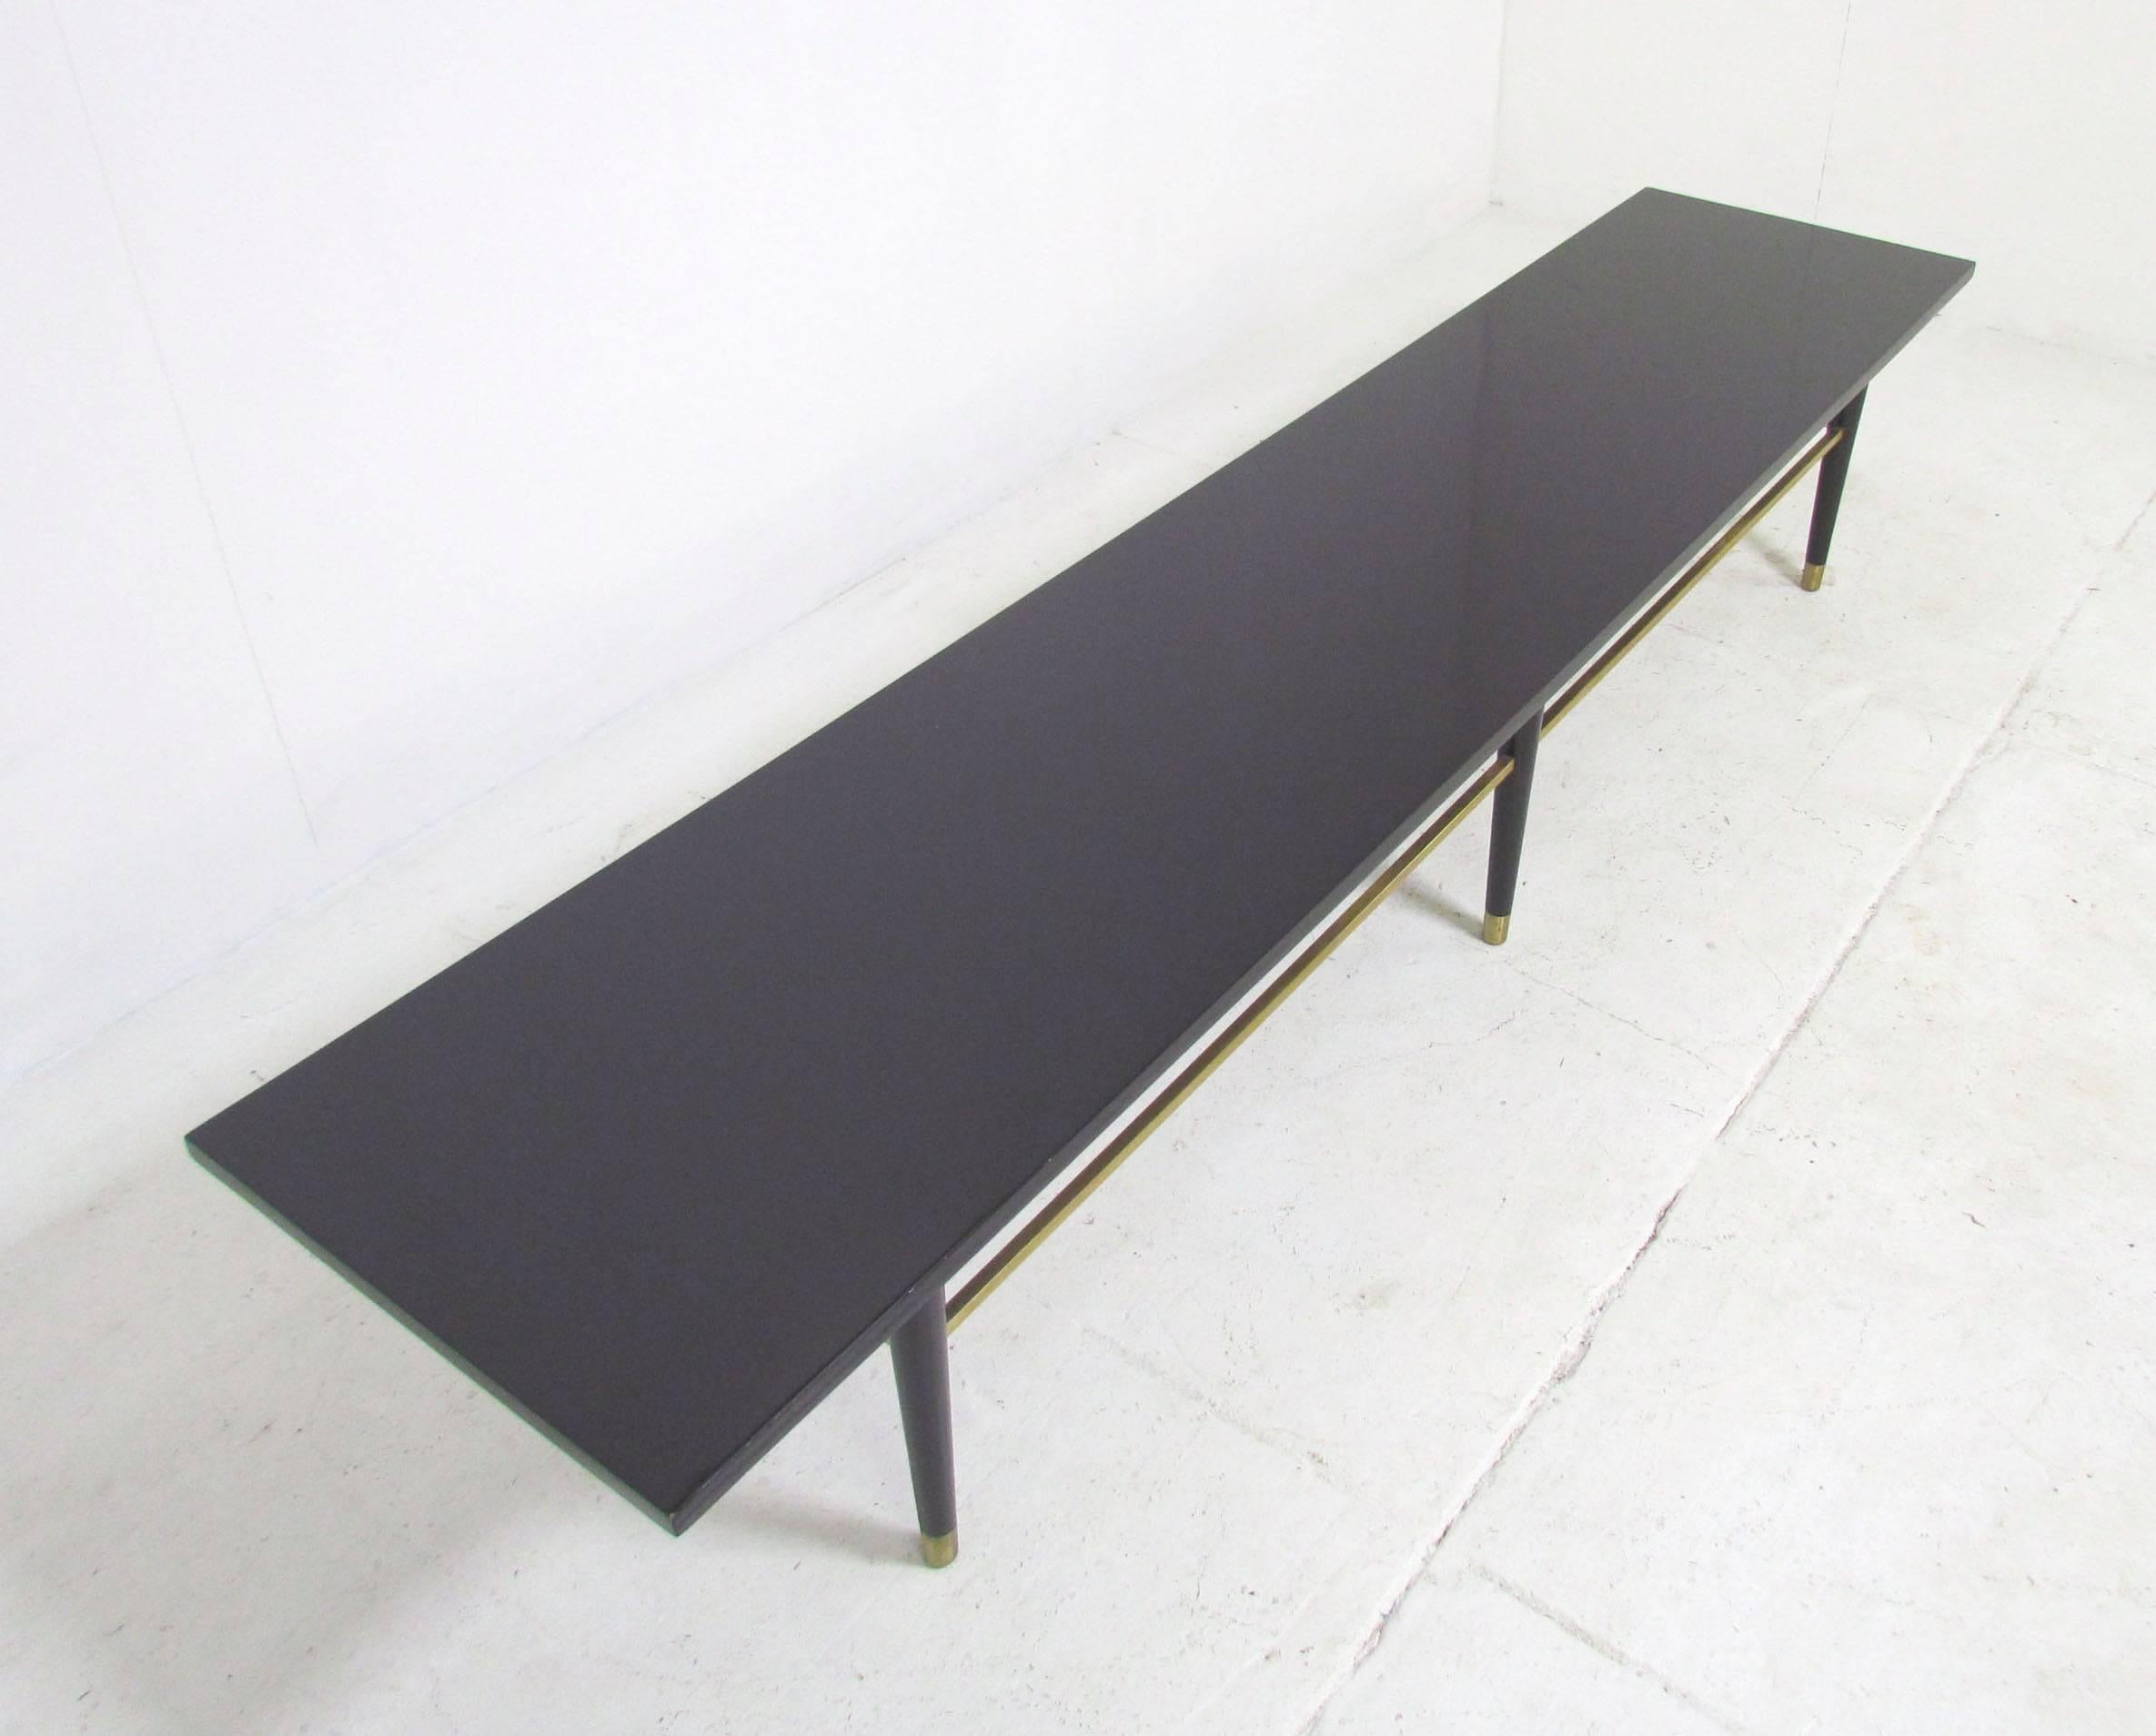 Mid-Century American modern coffee table in the manner of Paul McCobb. High gloss black lacquer with brass stretchers and feet. Generously proportioned at 84" long (7' 2").